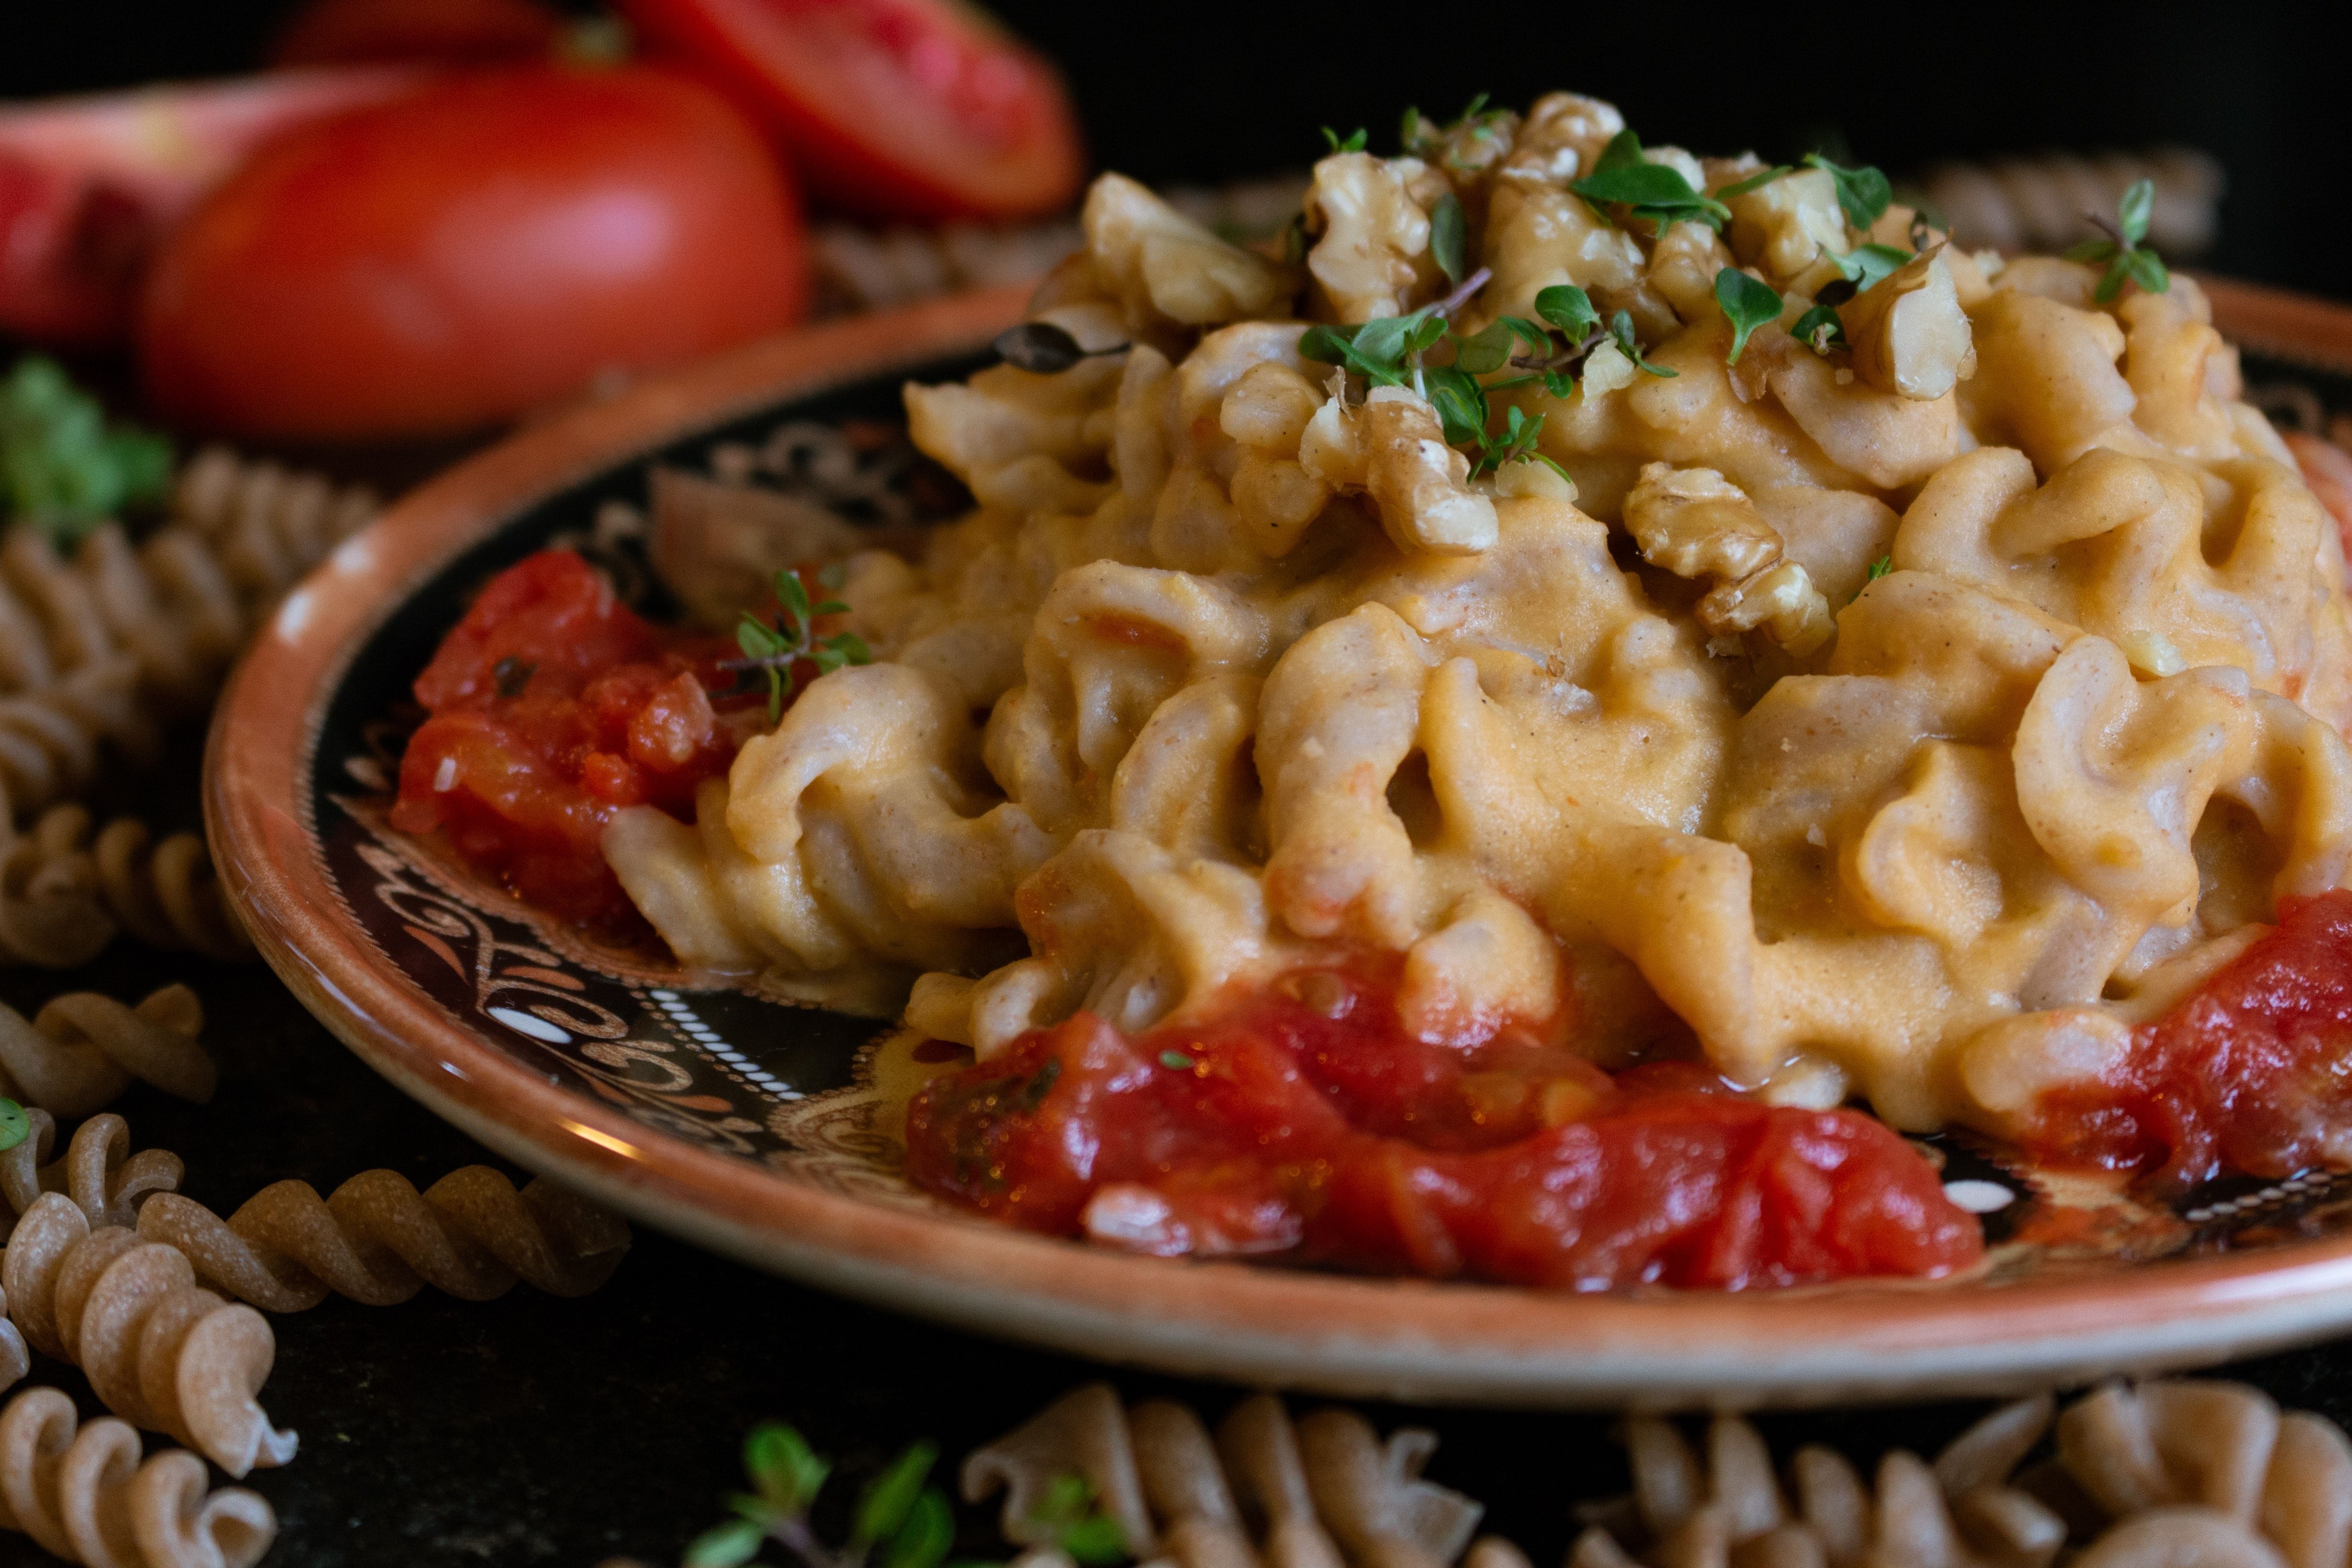 Mac And Cheese Picture. Download Free Image